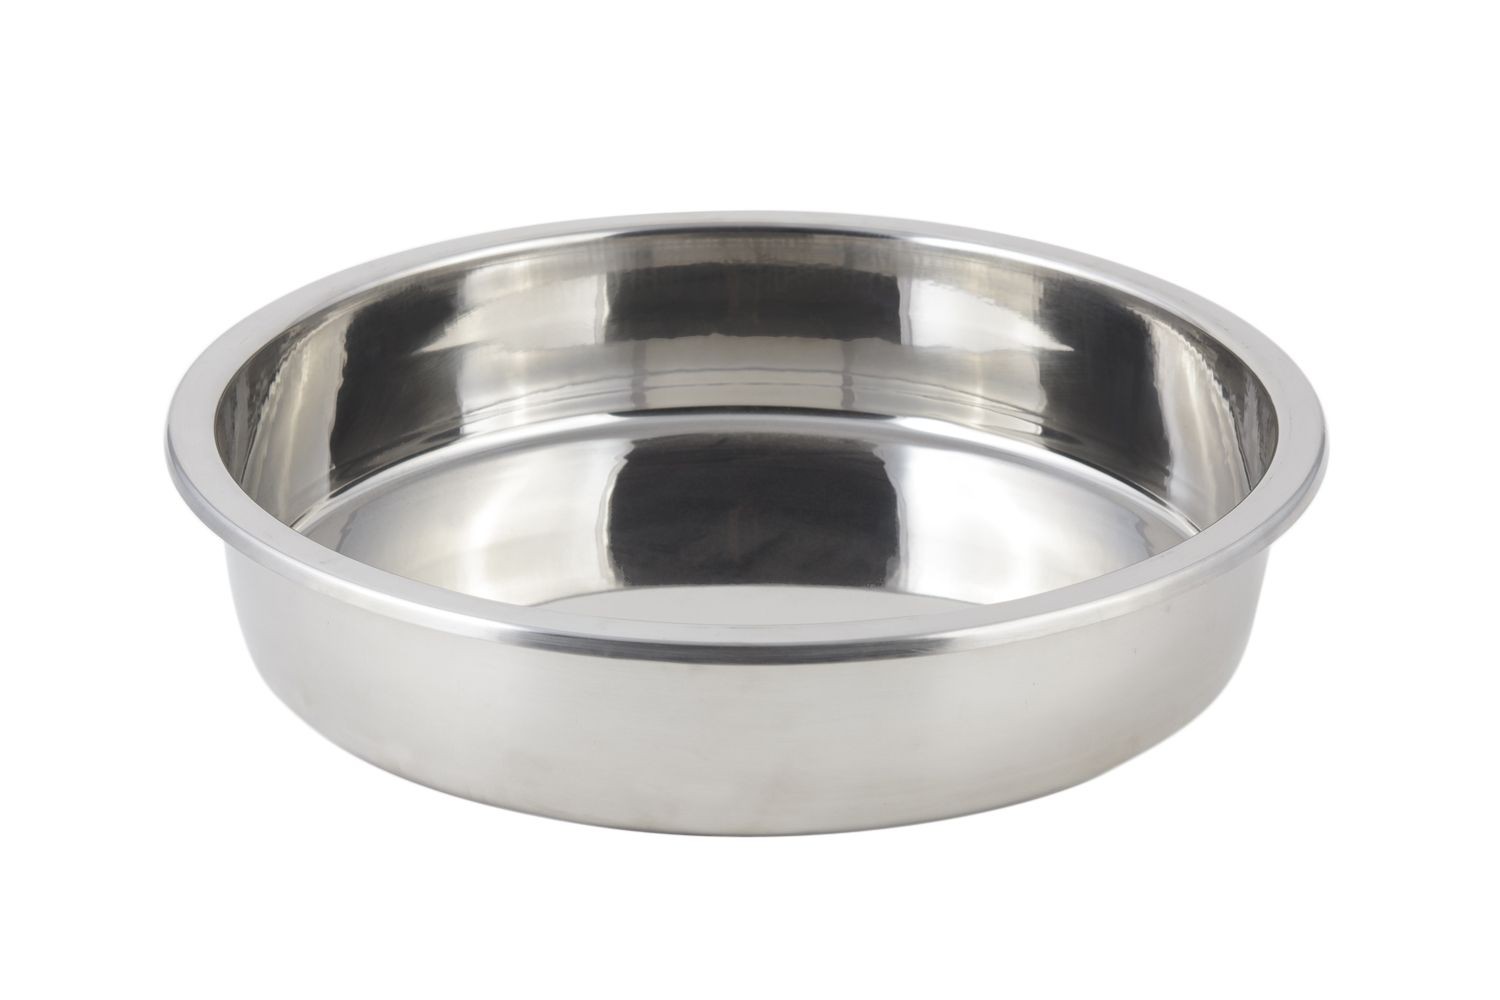 Bon Chef 12001 Stainless Steel Round Food Pan for 12000 and 60032, 8 Qt.